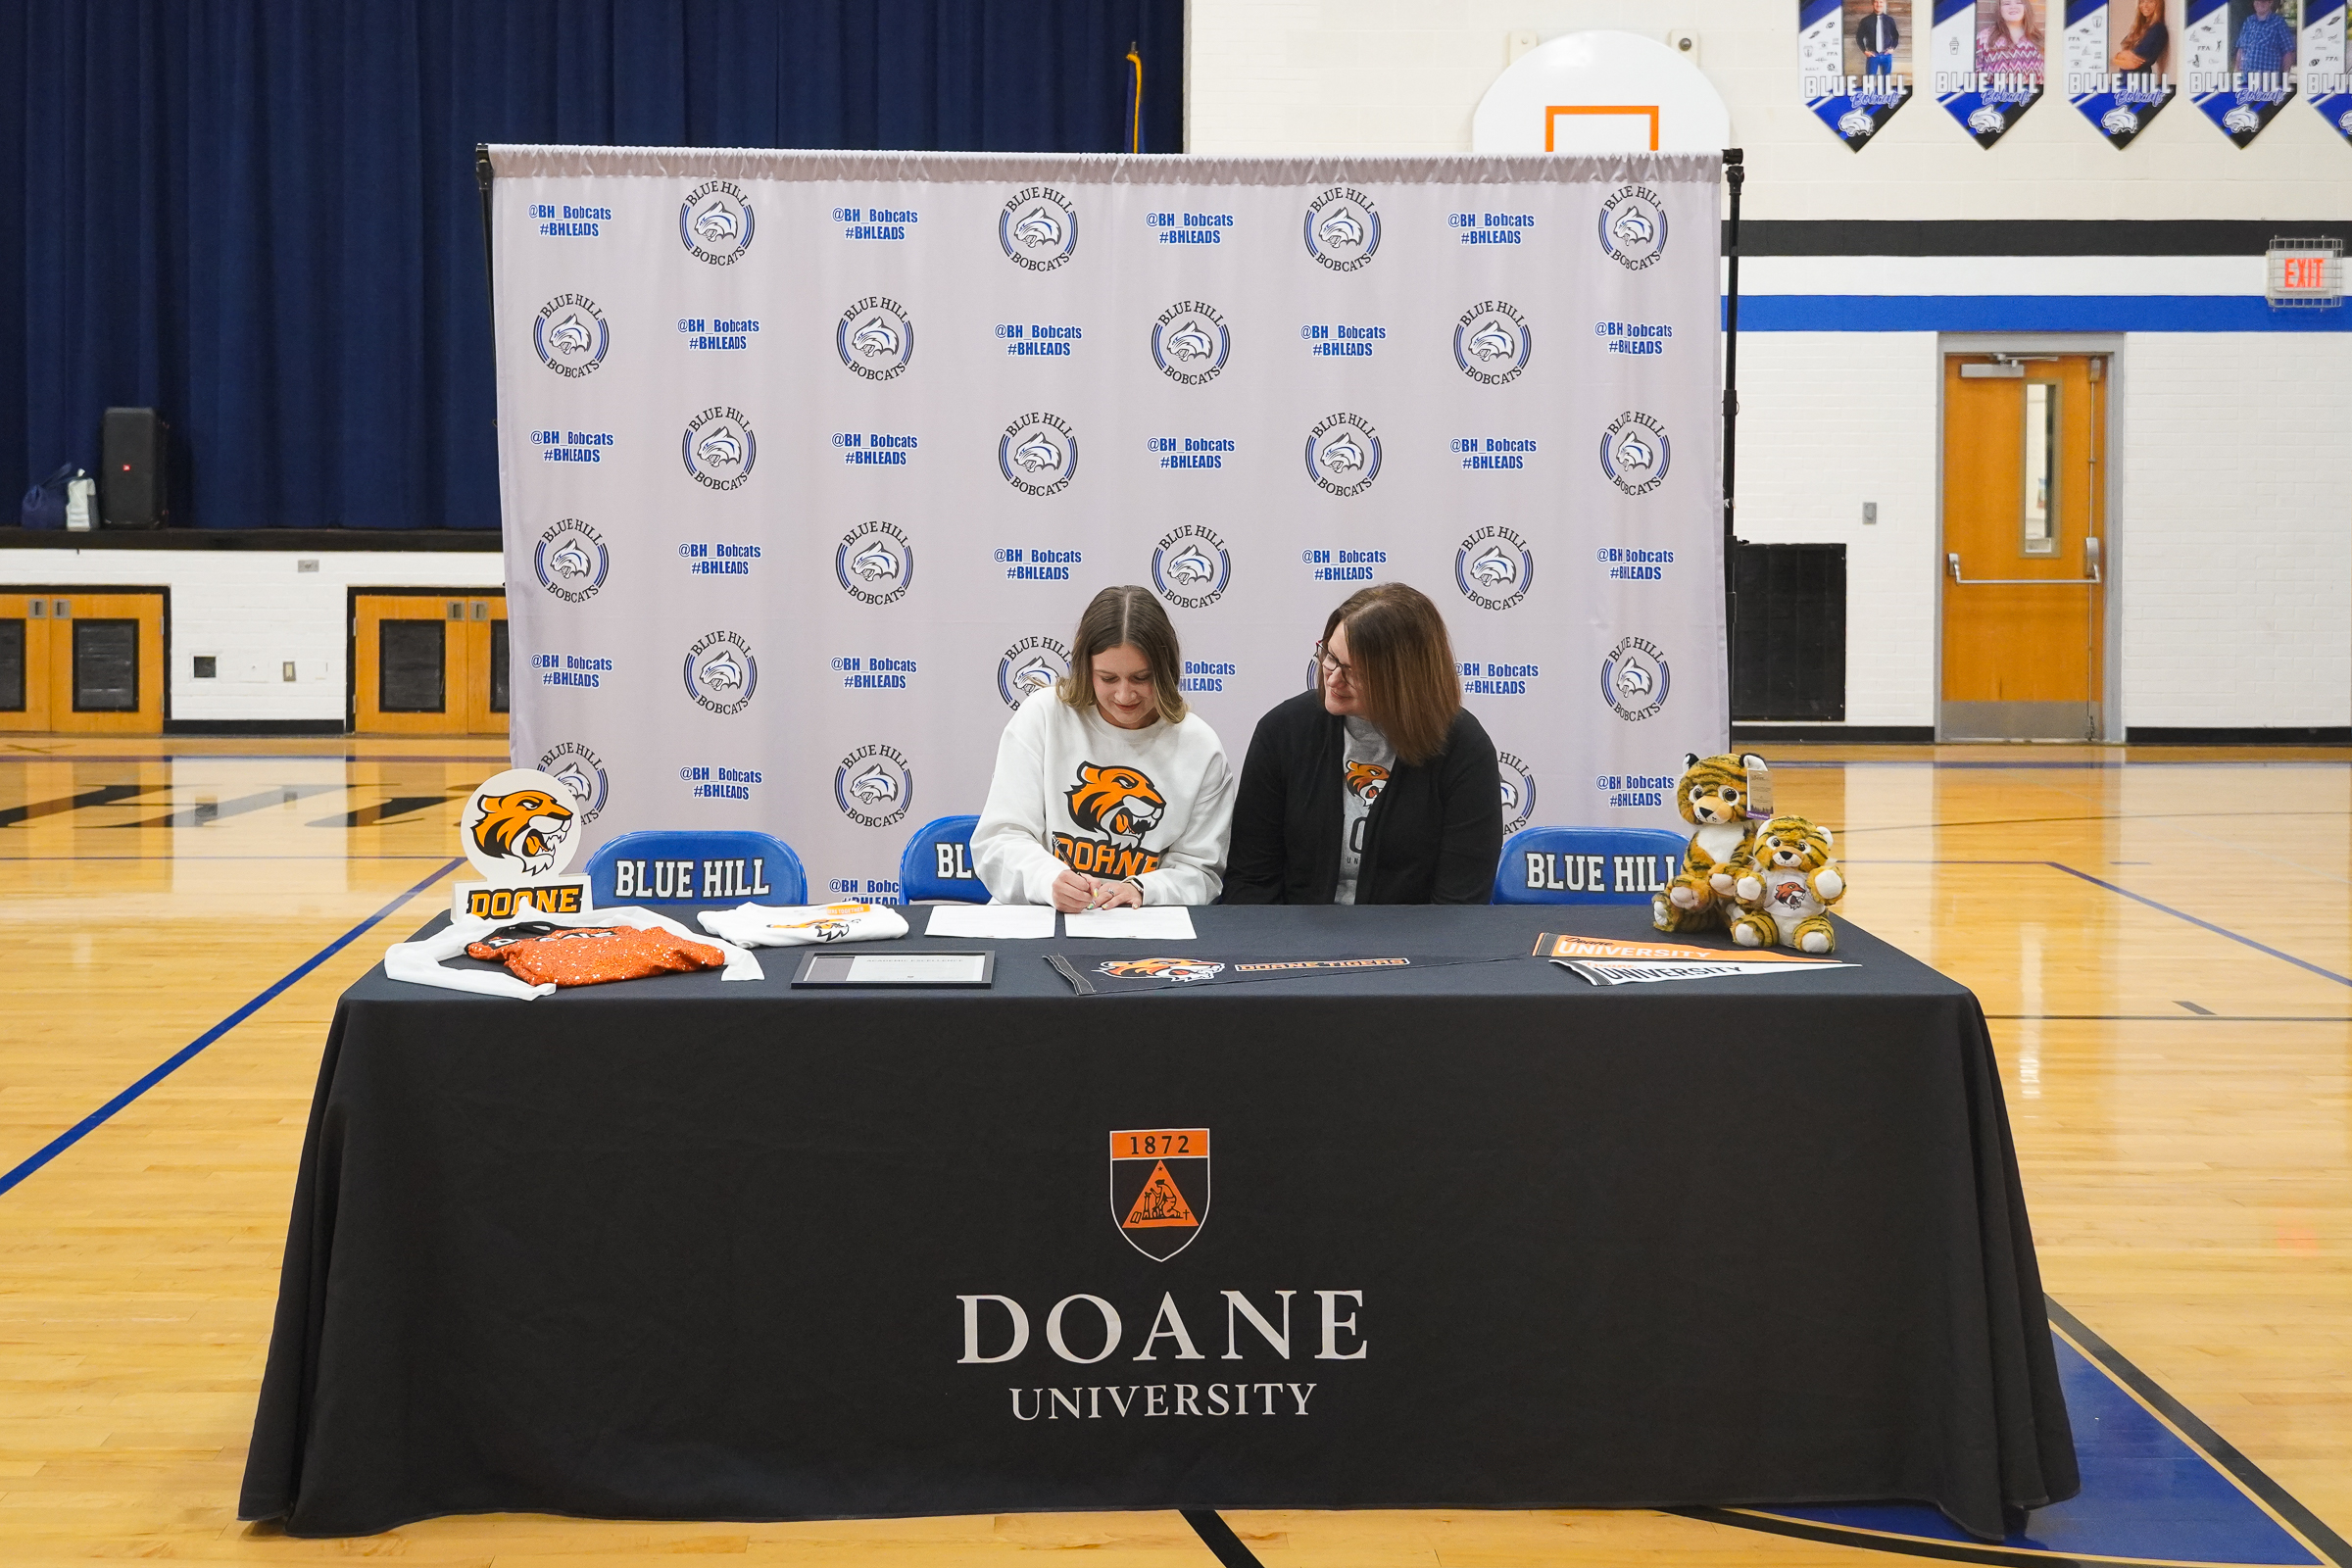 Two women sit behind a table draped with a black cloth that reads "Doane University." The woman on the left wears a Doane sweatshirt and is signing a document. Around them is Doane swag, including two stuffed tigers, several pennants, a shirt and a uniform for the Doane dance team.